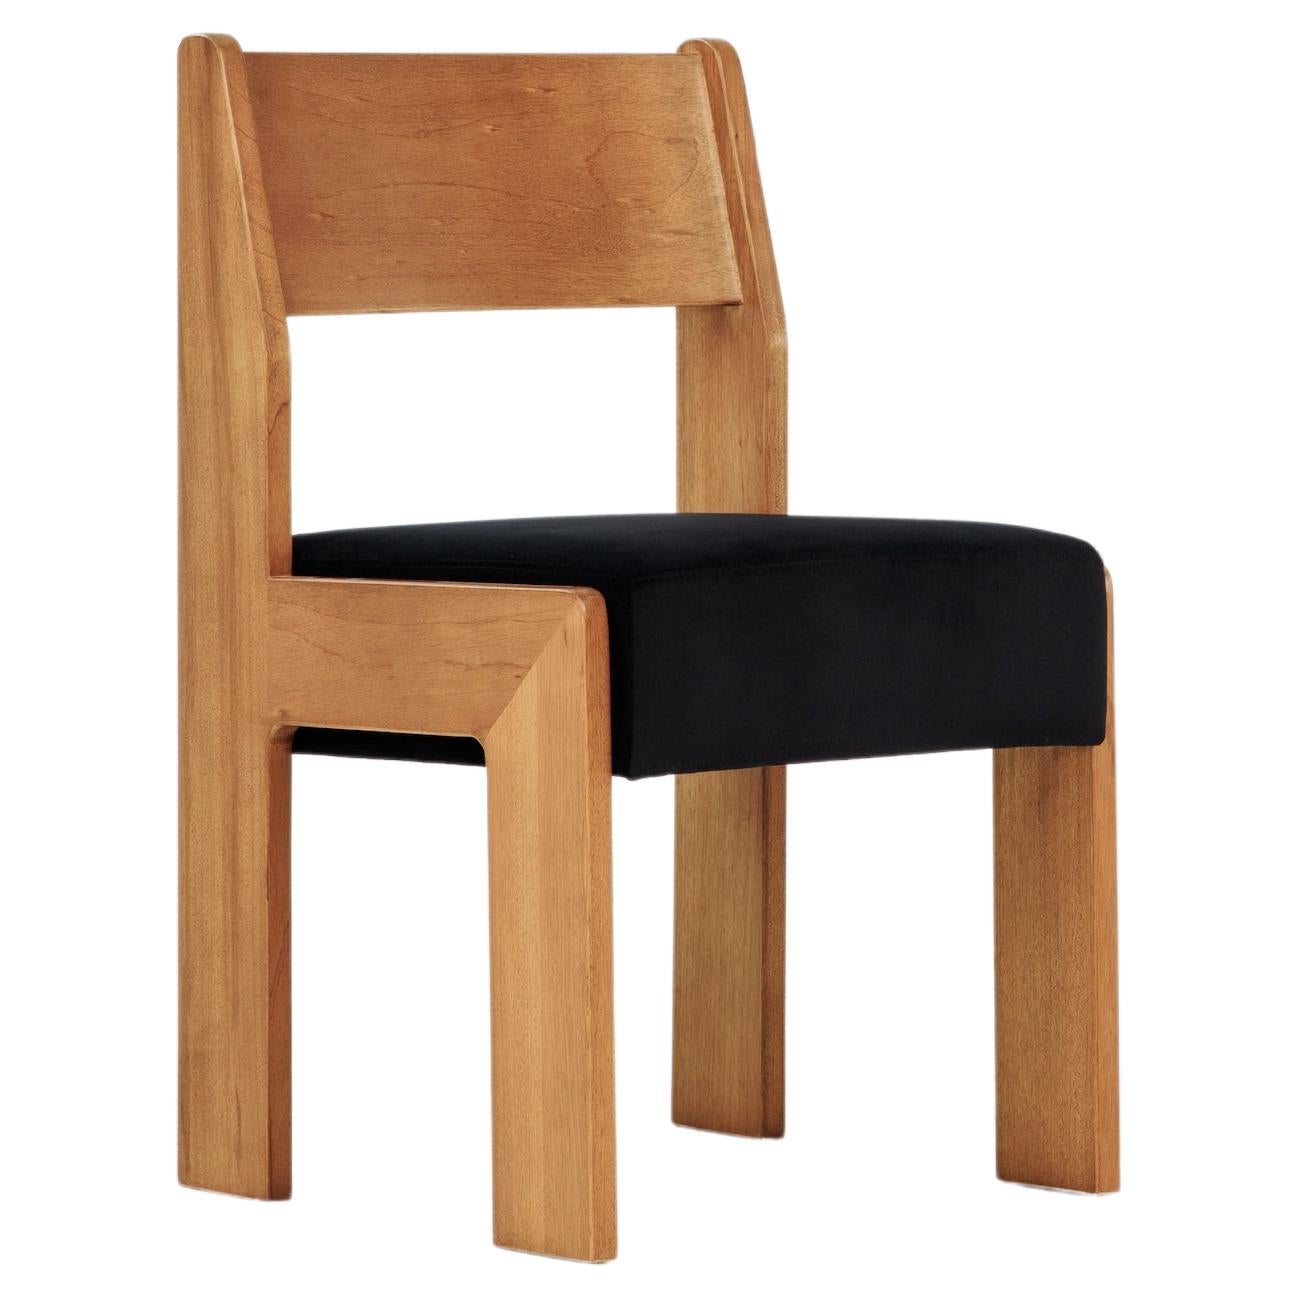 Reka Side Chair, Minimalist Velvet and Wood Dining Chair in Clay/Black For Sale